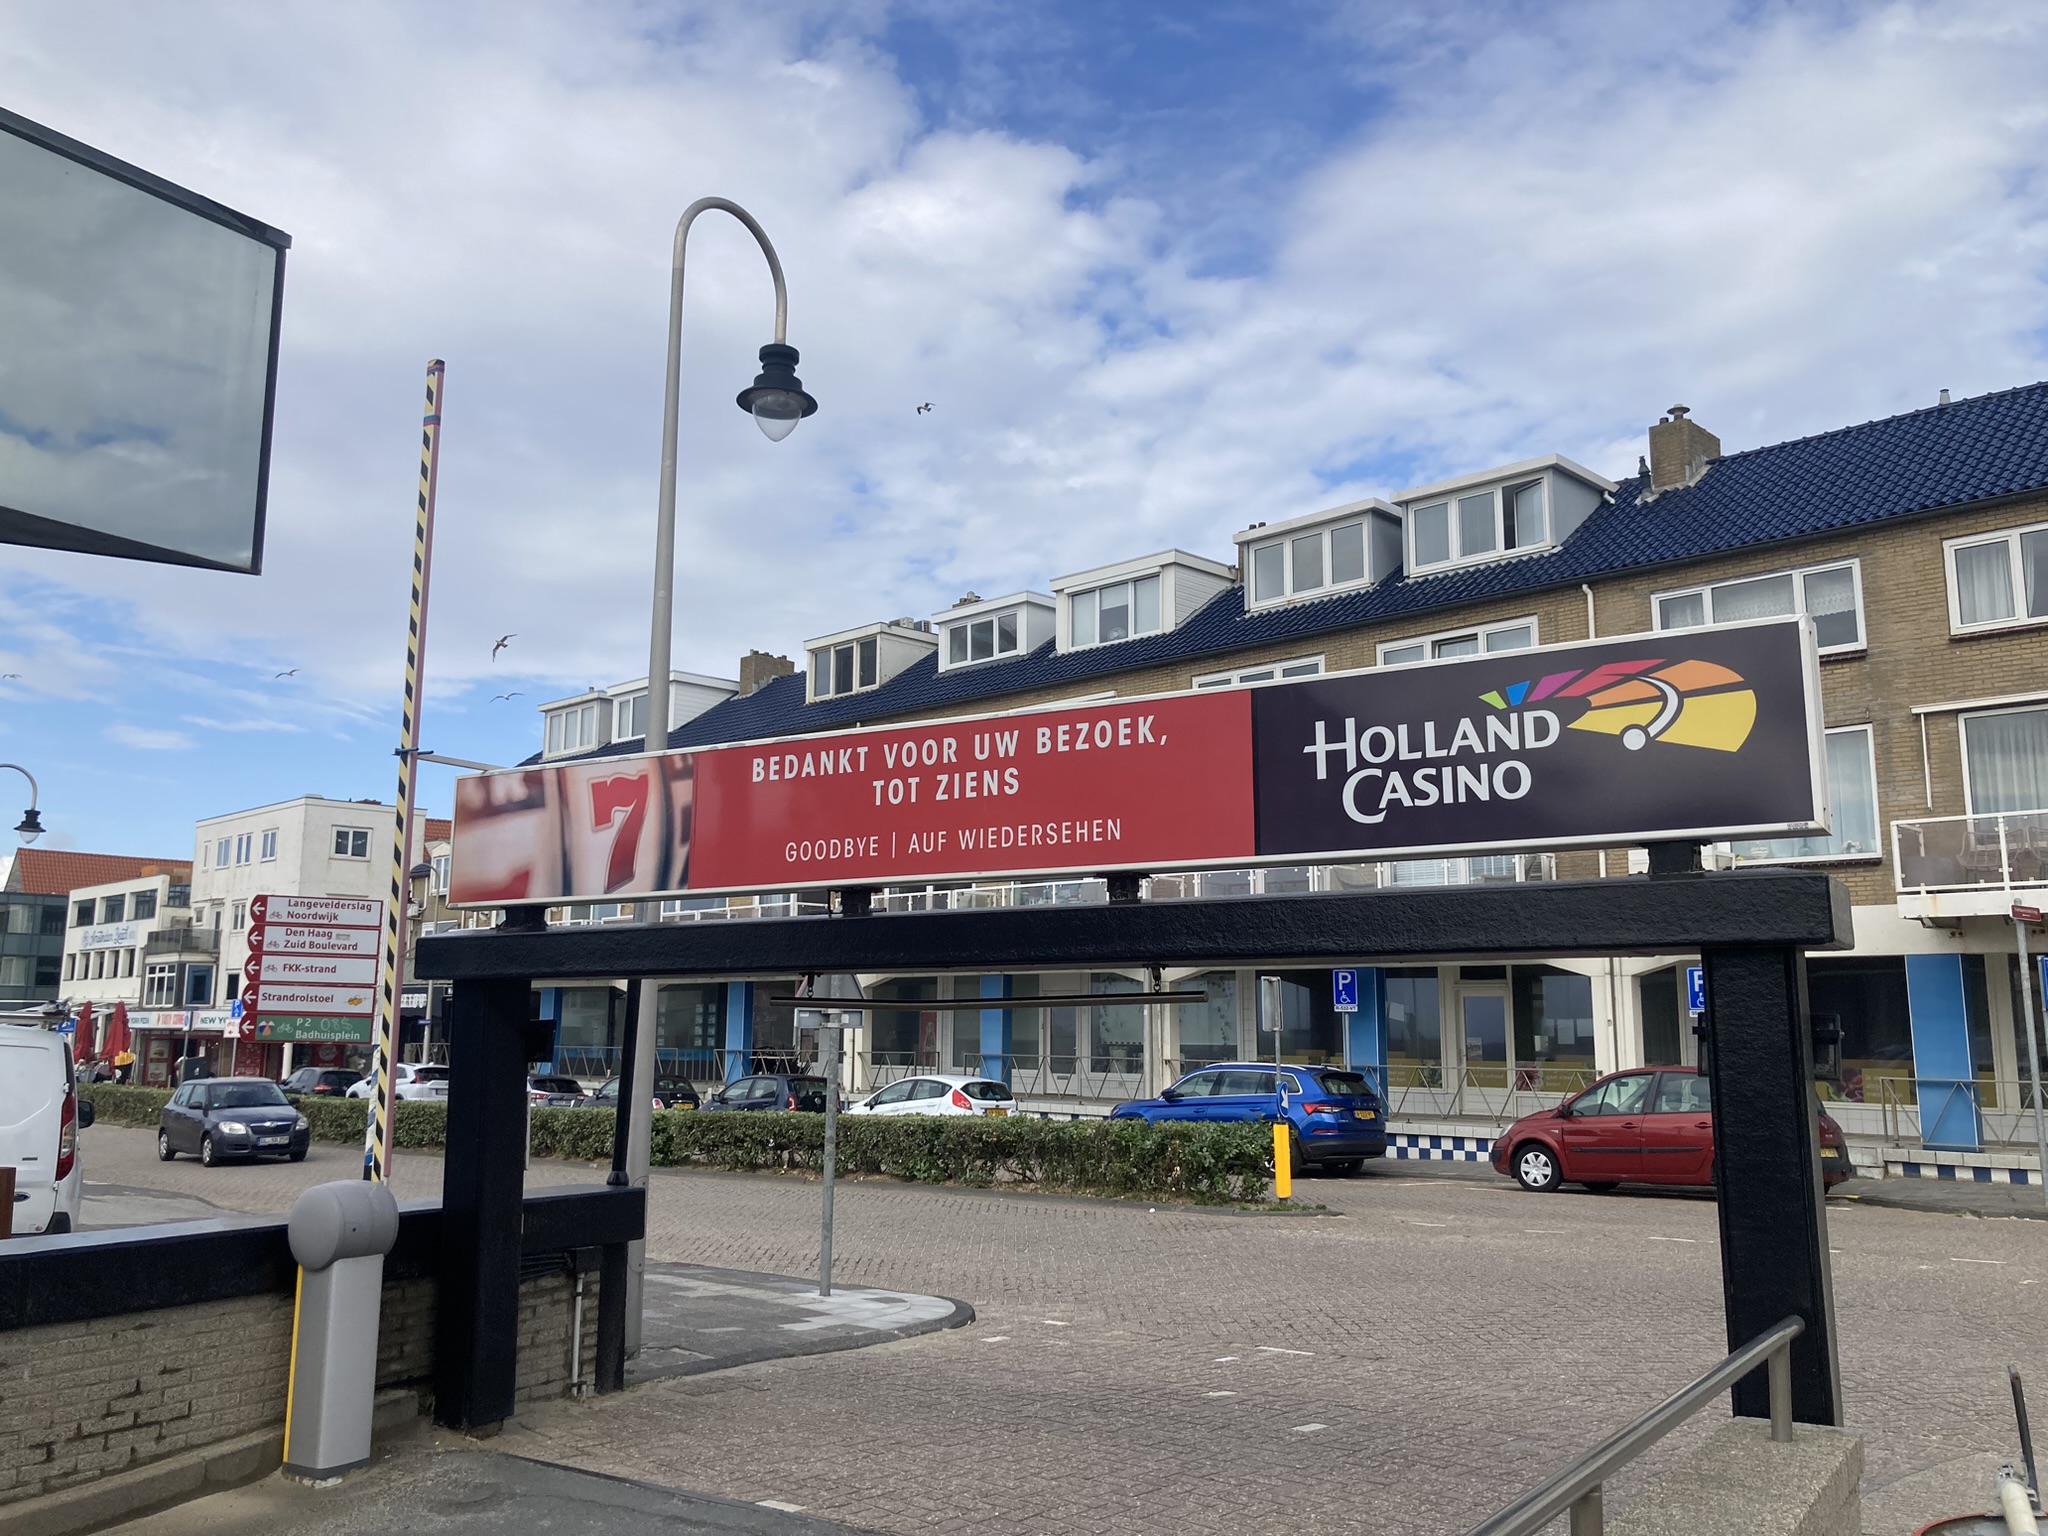 Holland Casino to “invest in new concepts to boost numbers” – DutchNews.nl